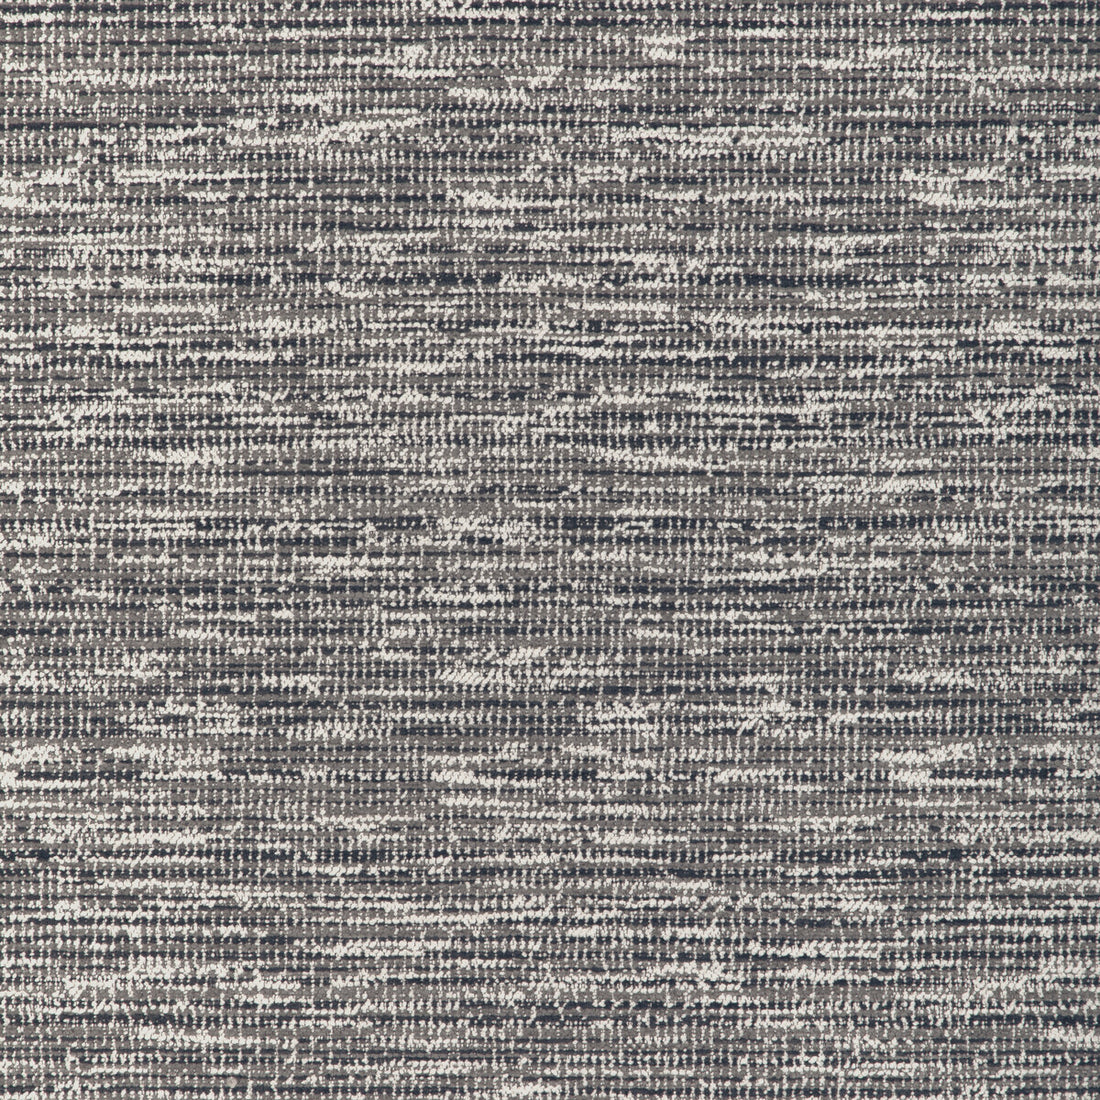 Kravet Design fabric in 37214-81 color - pattern 37214.81.0 - by Kravet Design in the Woven Colors collection